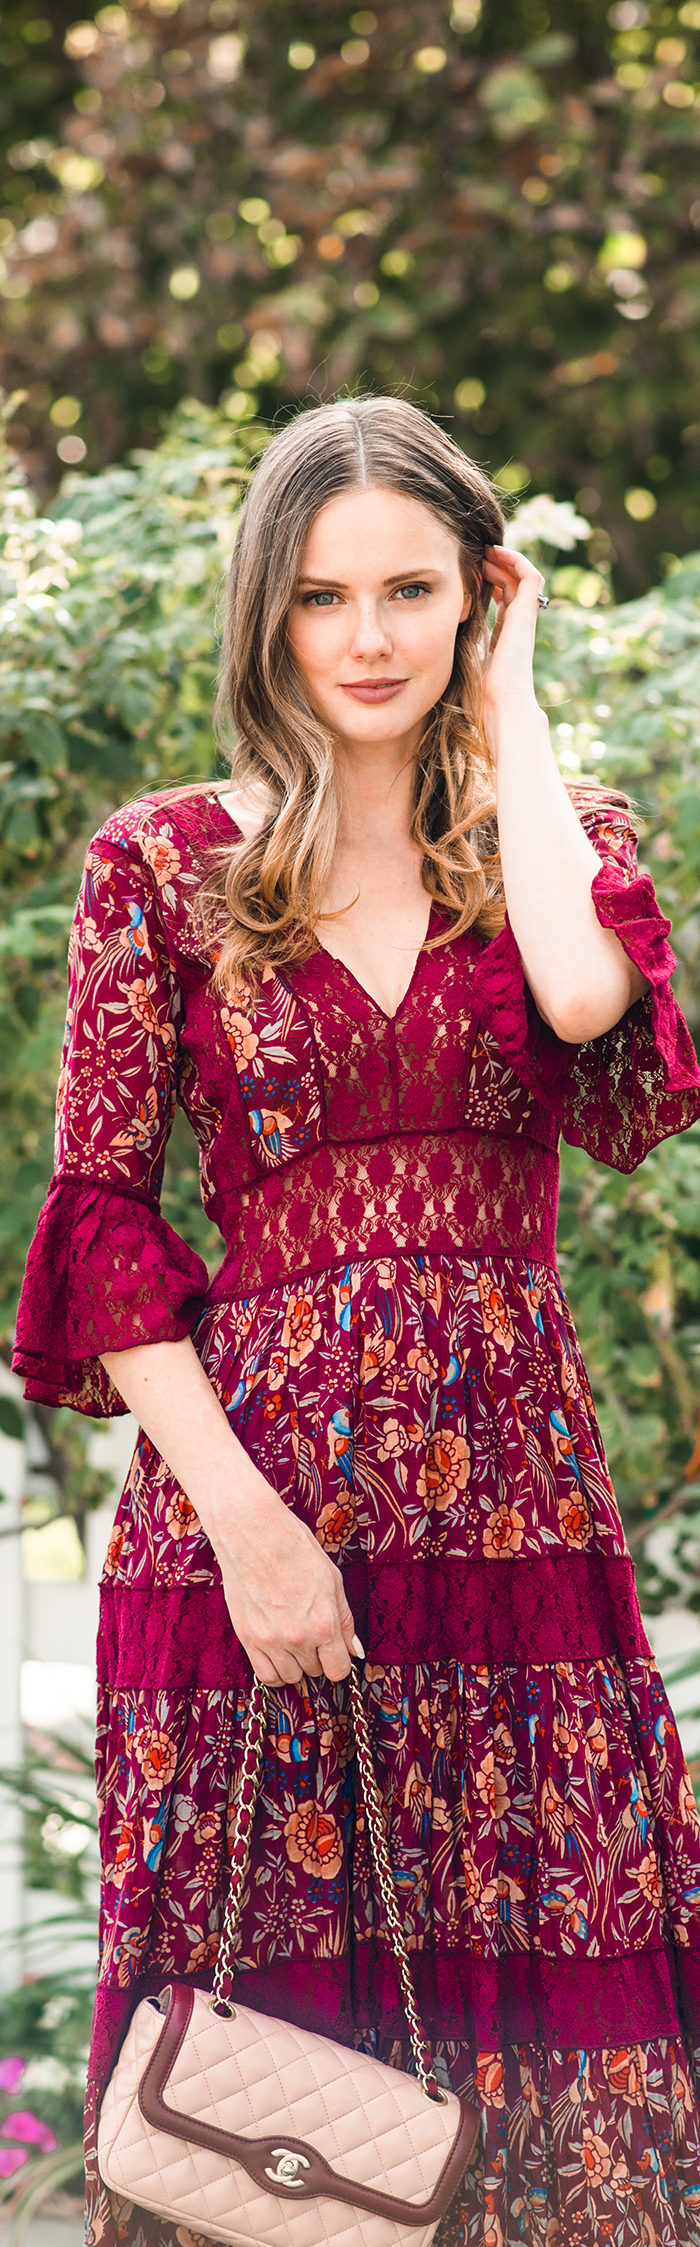 Alyssa Campanella of The A List blog is dressed for a fall wedding in Free People